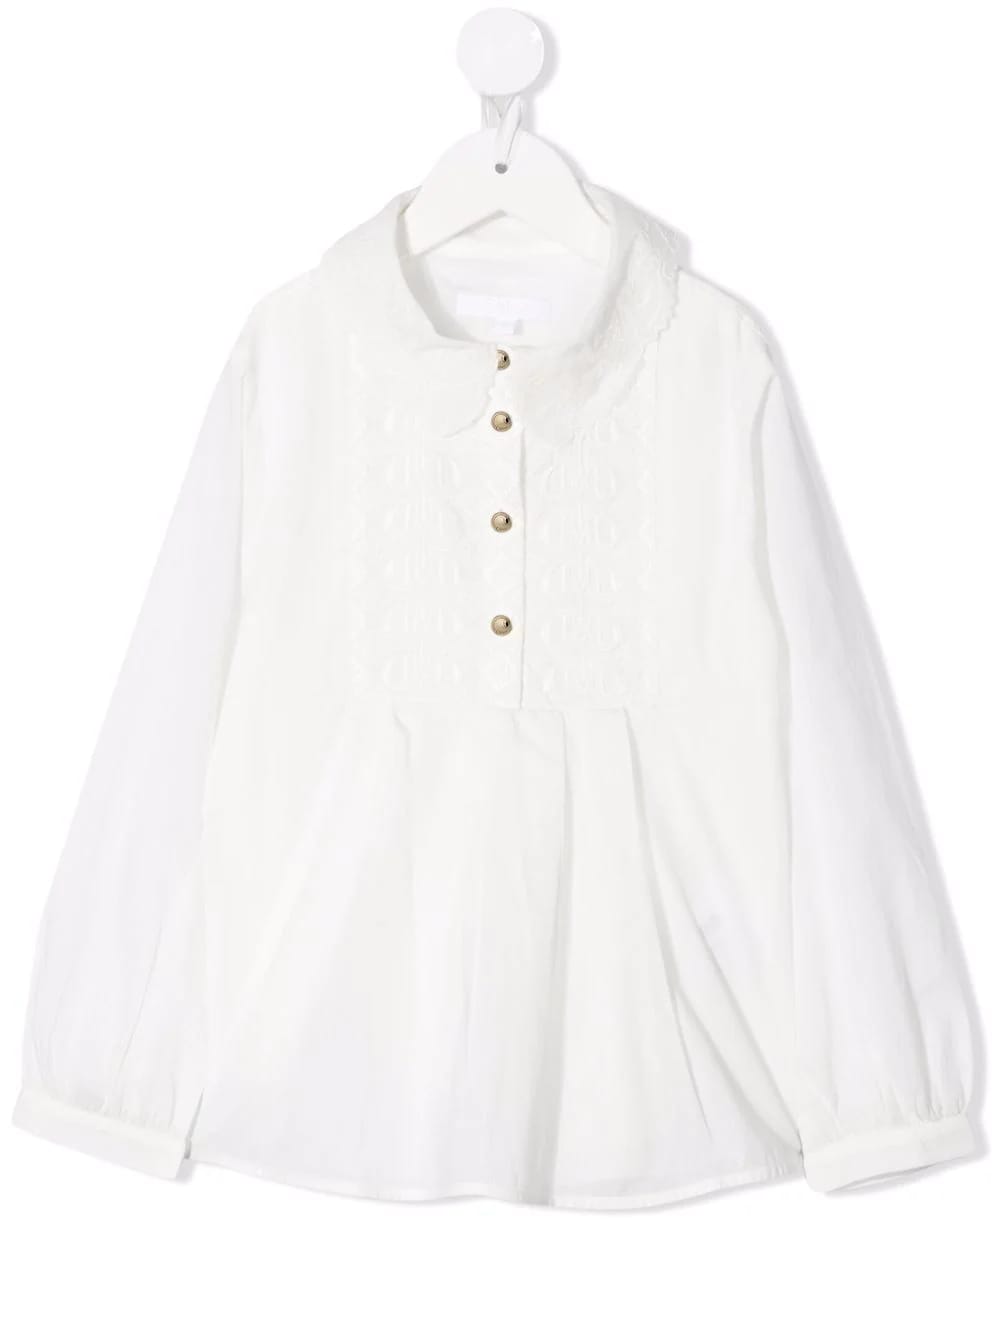 Chloé Kids White Shirt With Lace And Peter Pan Collar